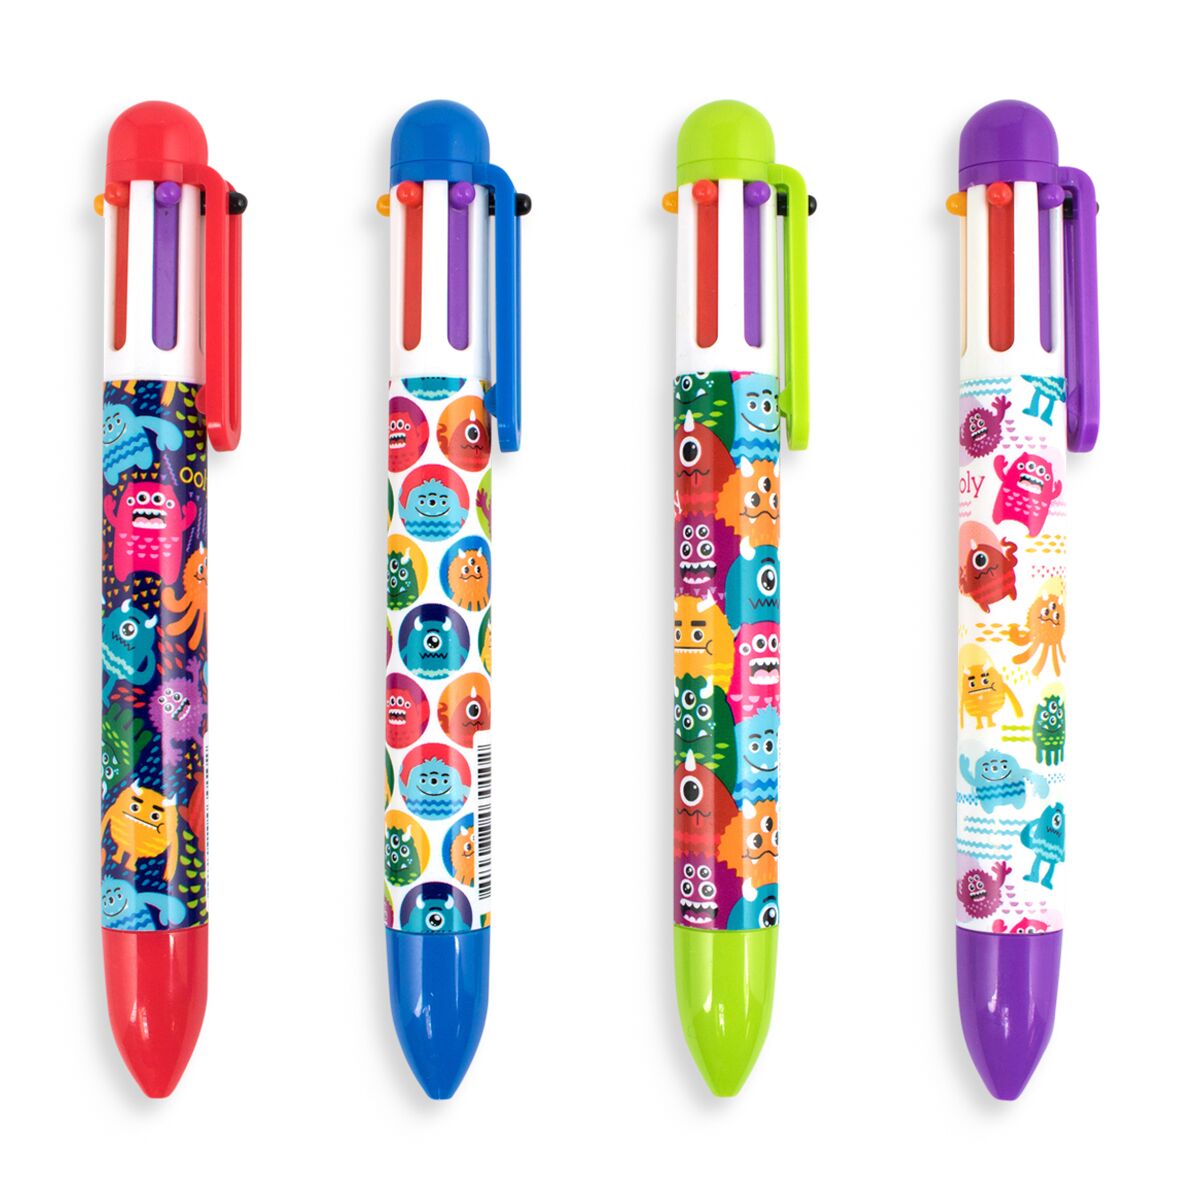 The Monster 6 Click Pens